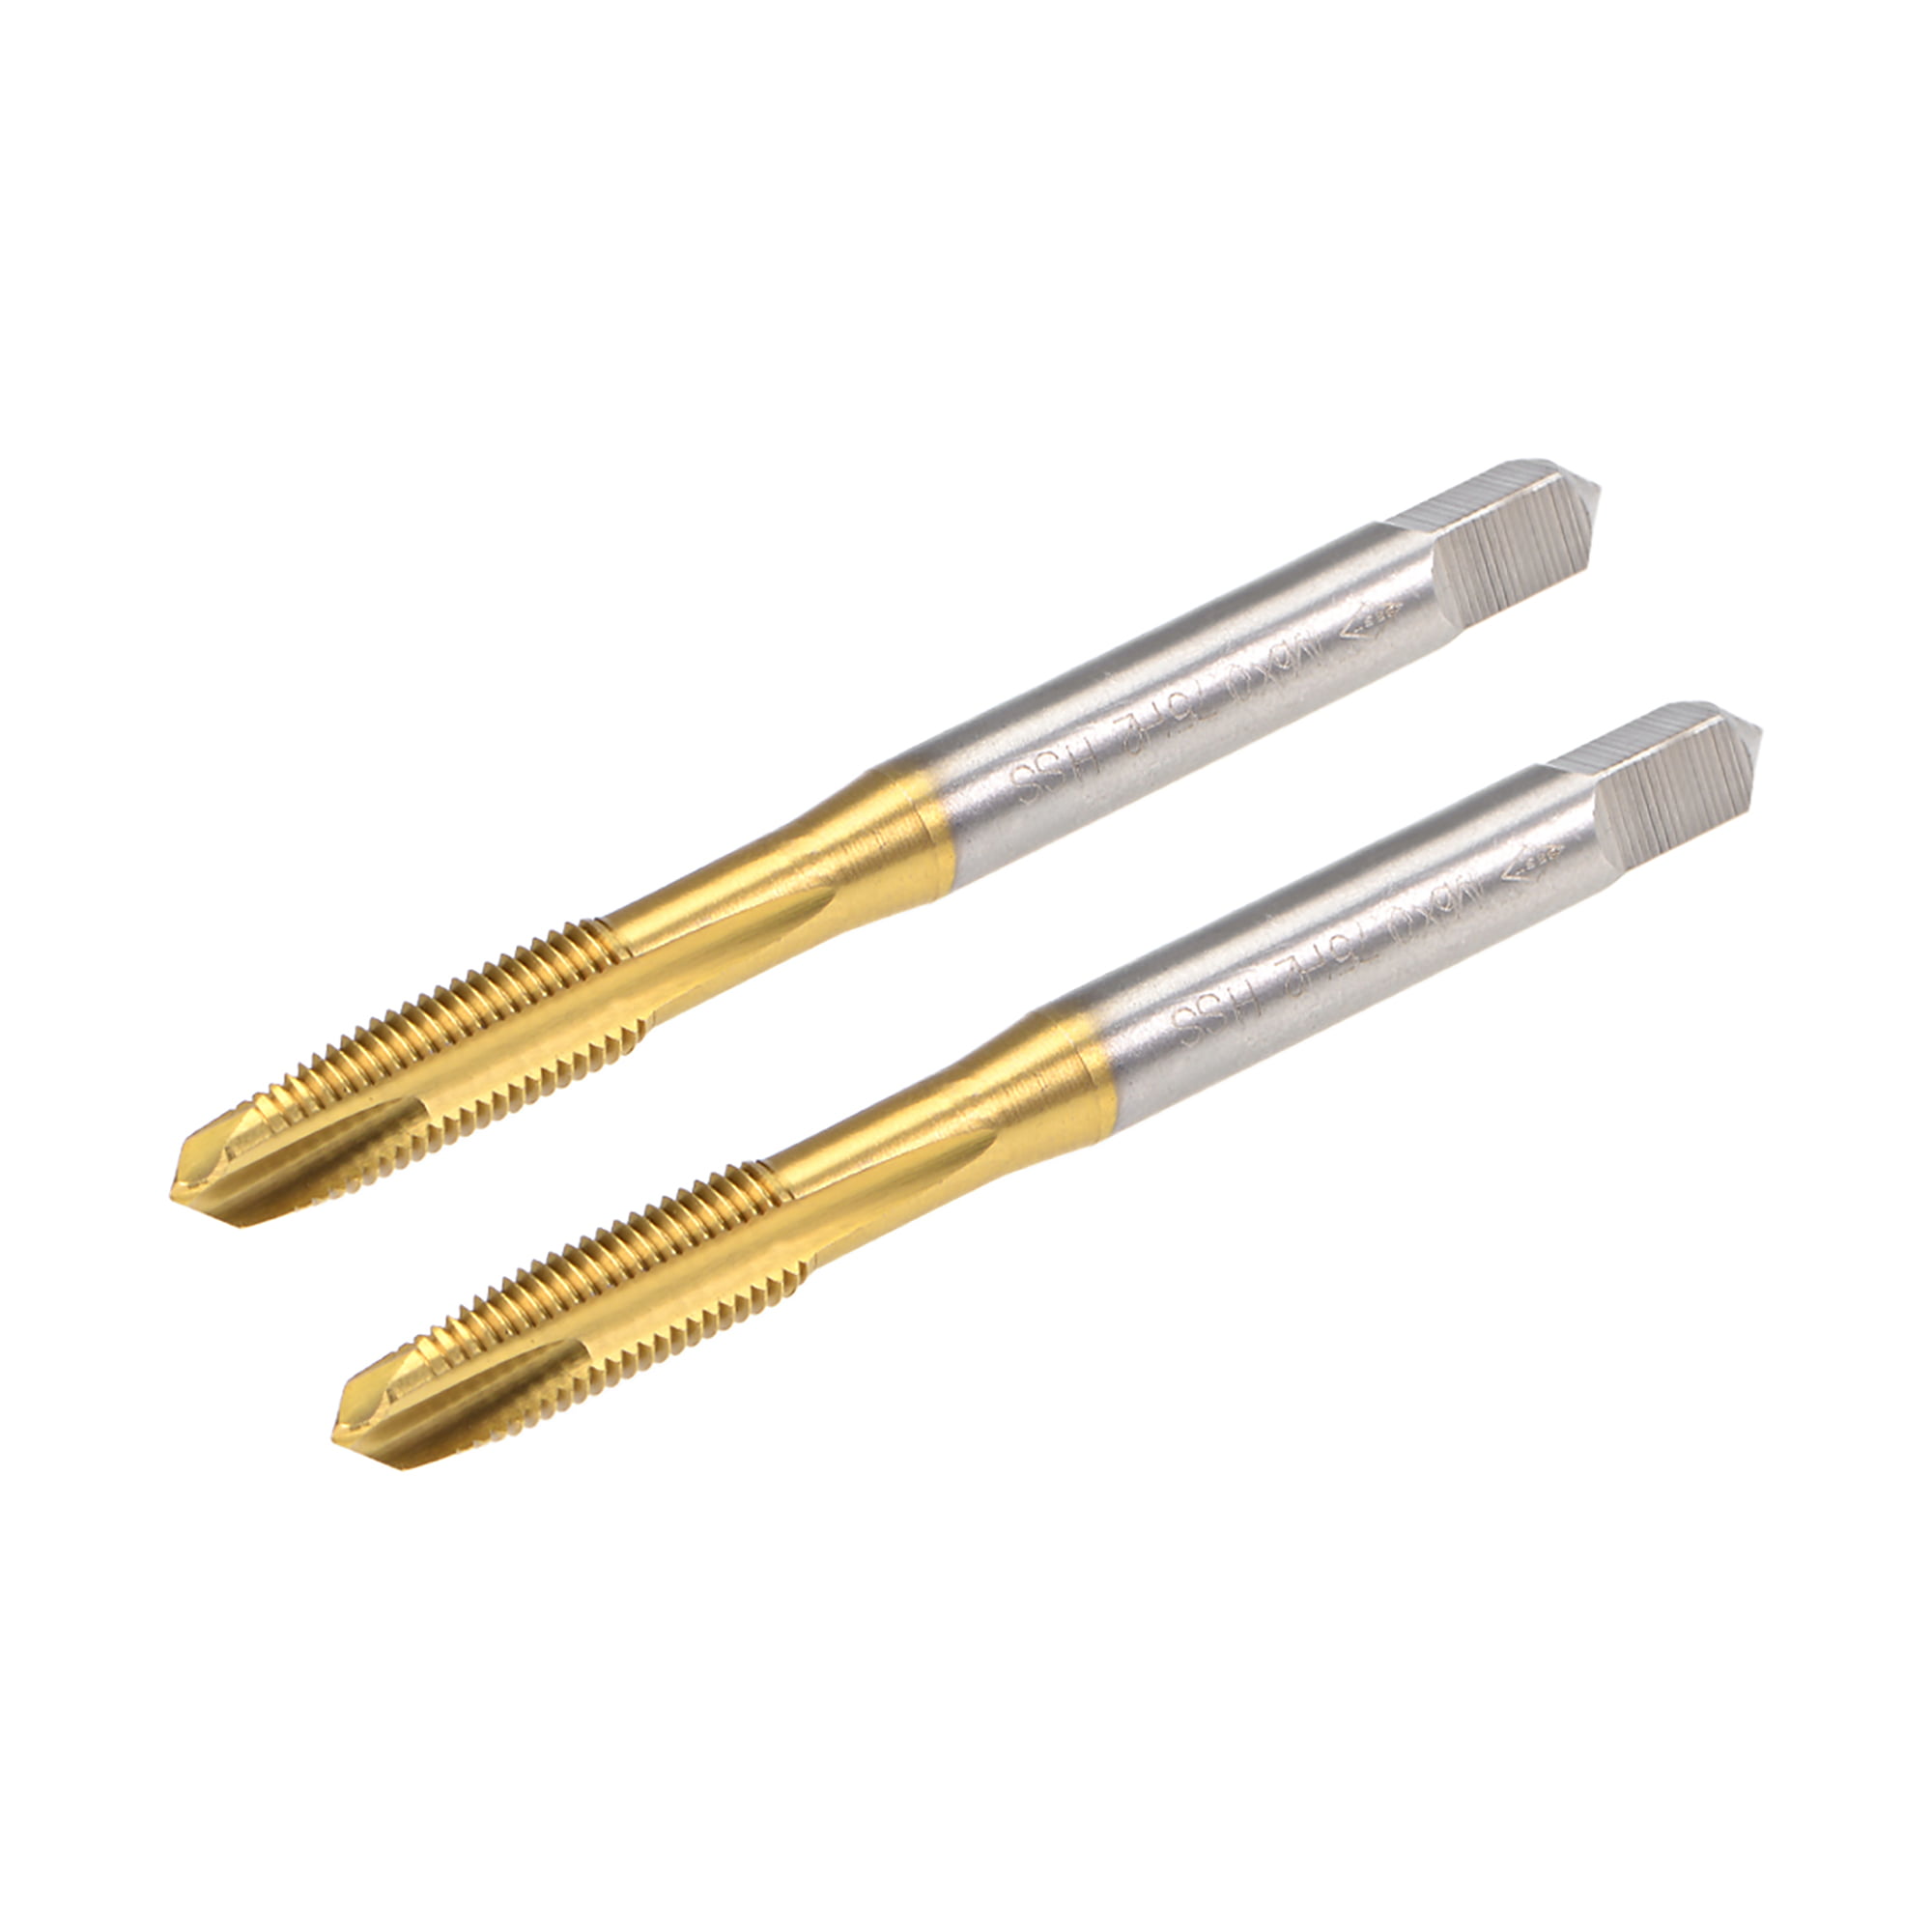 uxcell Metric Machine Tap Left M6 Thread 0.75 Pitch H2 Accuracy 3 Flutes High Speed Steel 2pcs